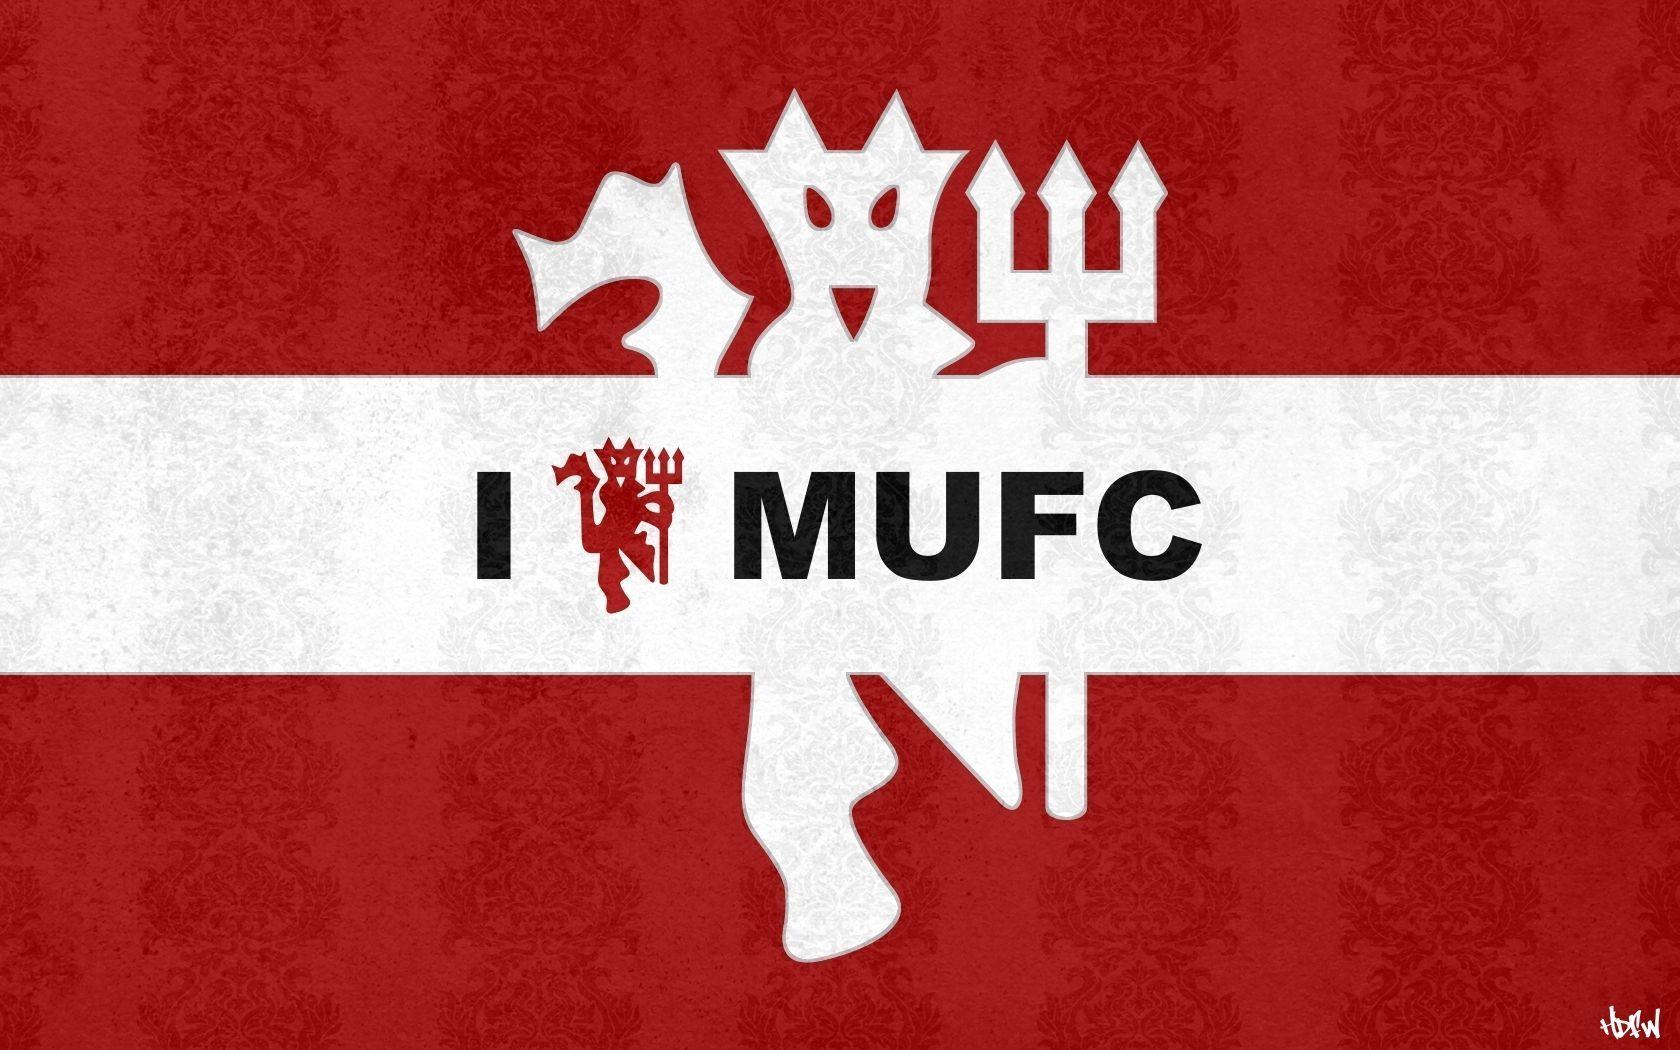 Manchester United Wallpapers HD Wallpapers